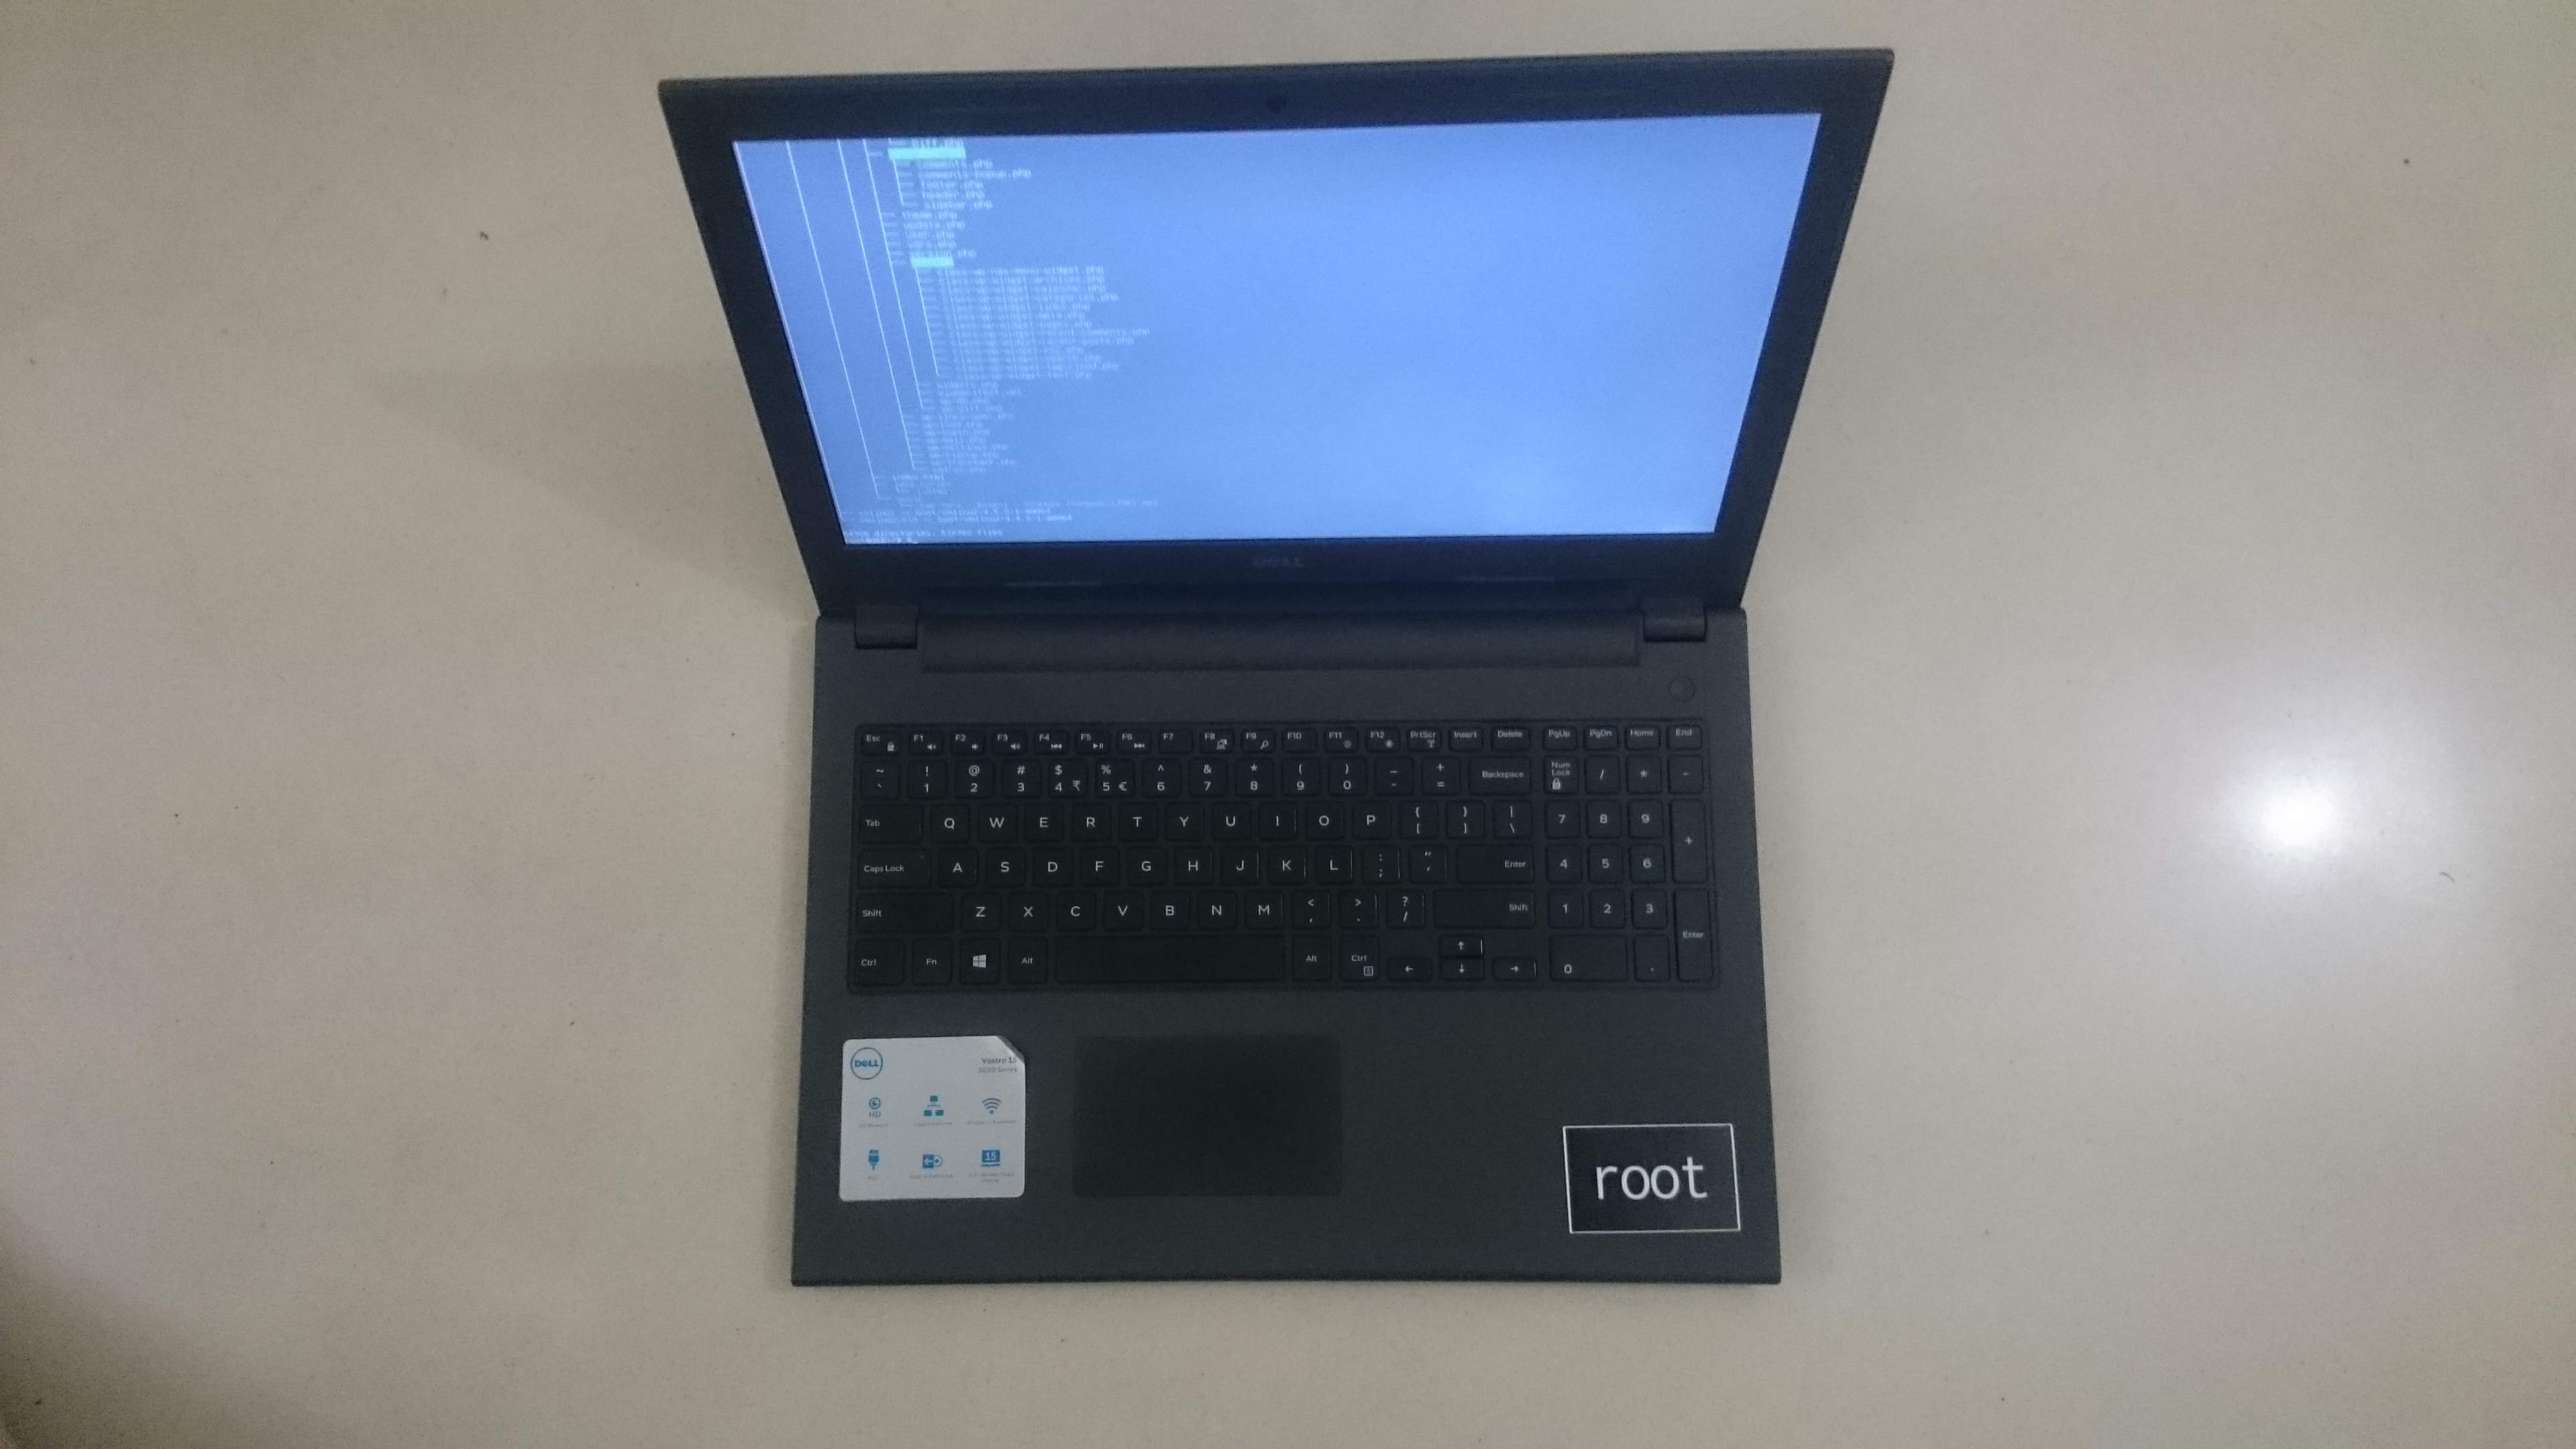 This time it is wearing the root sticker. For a Linuxer root is one of the greatest power you have.